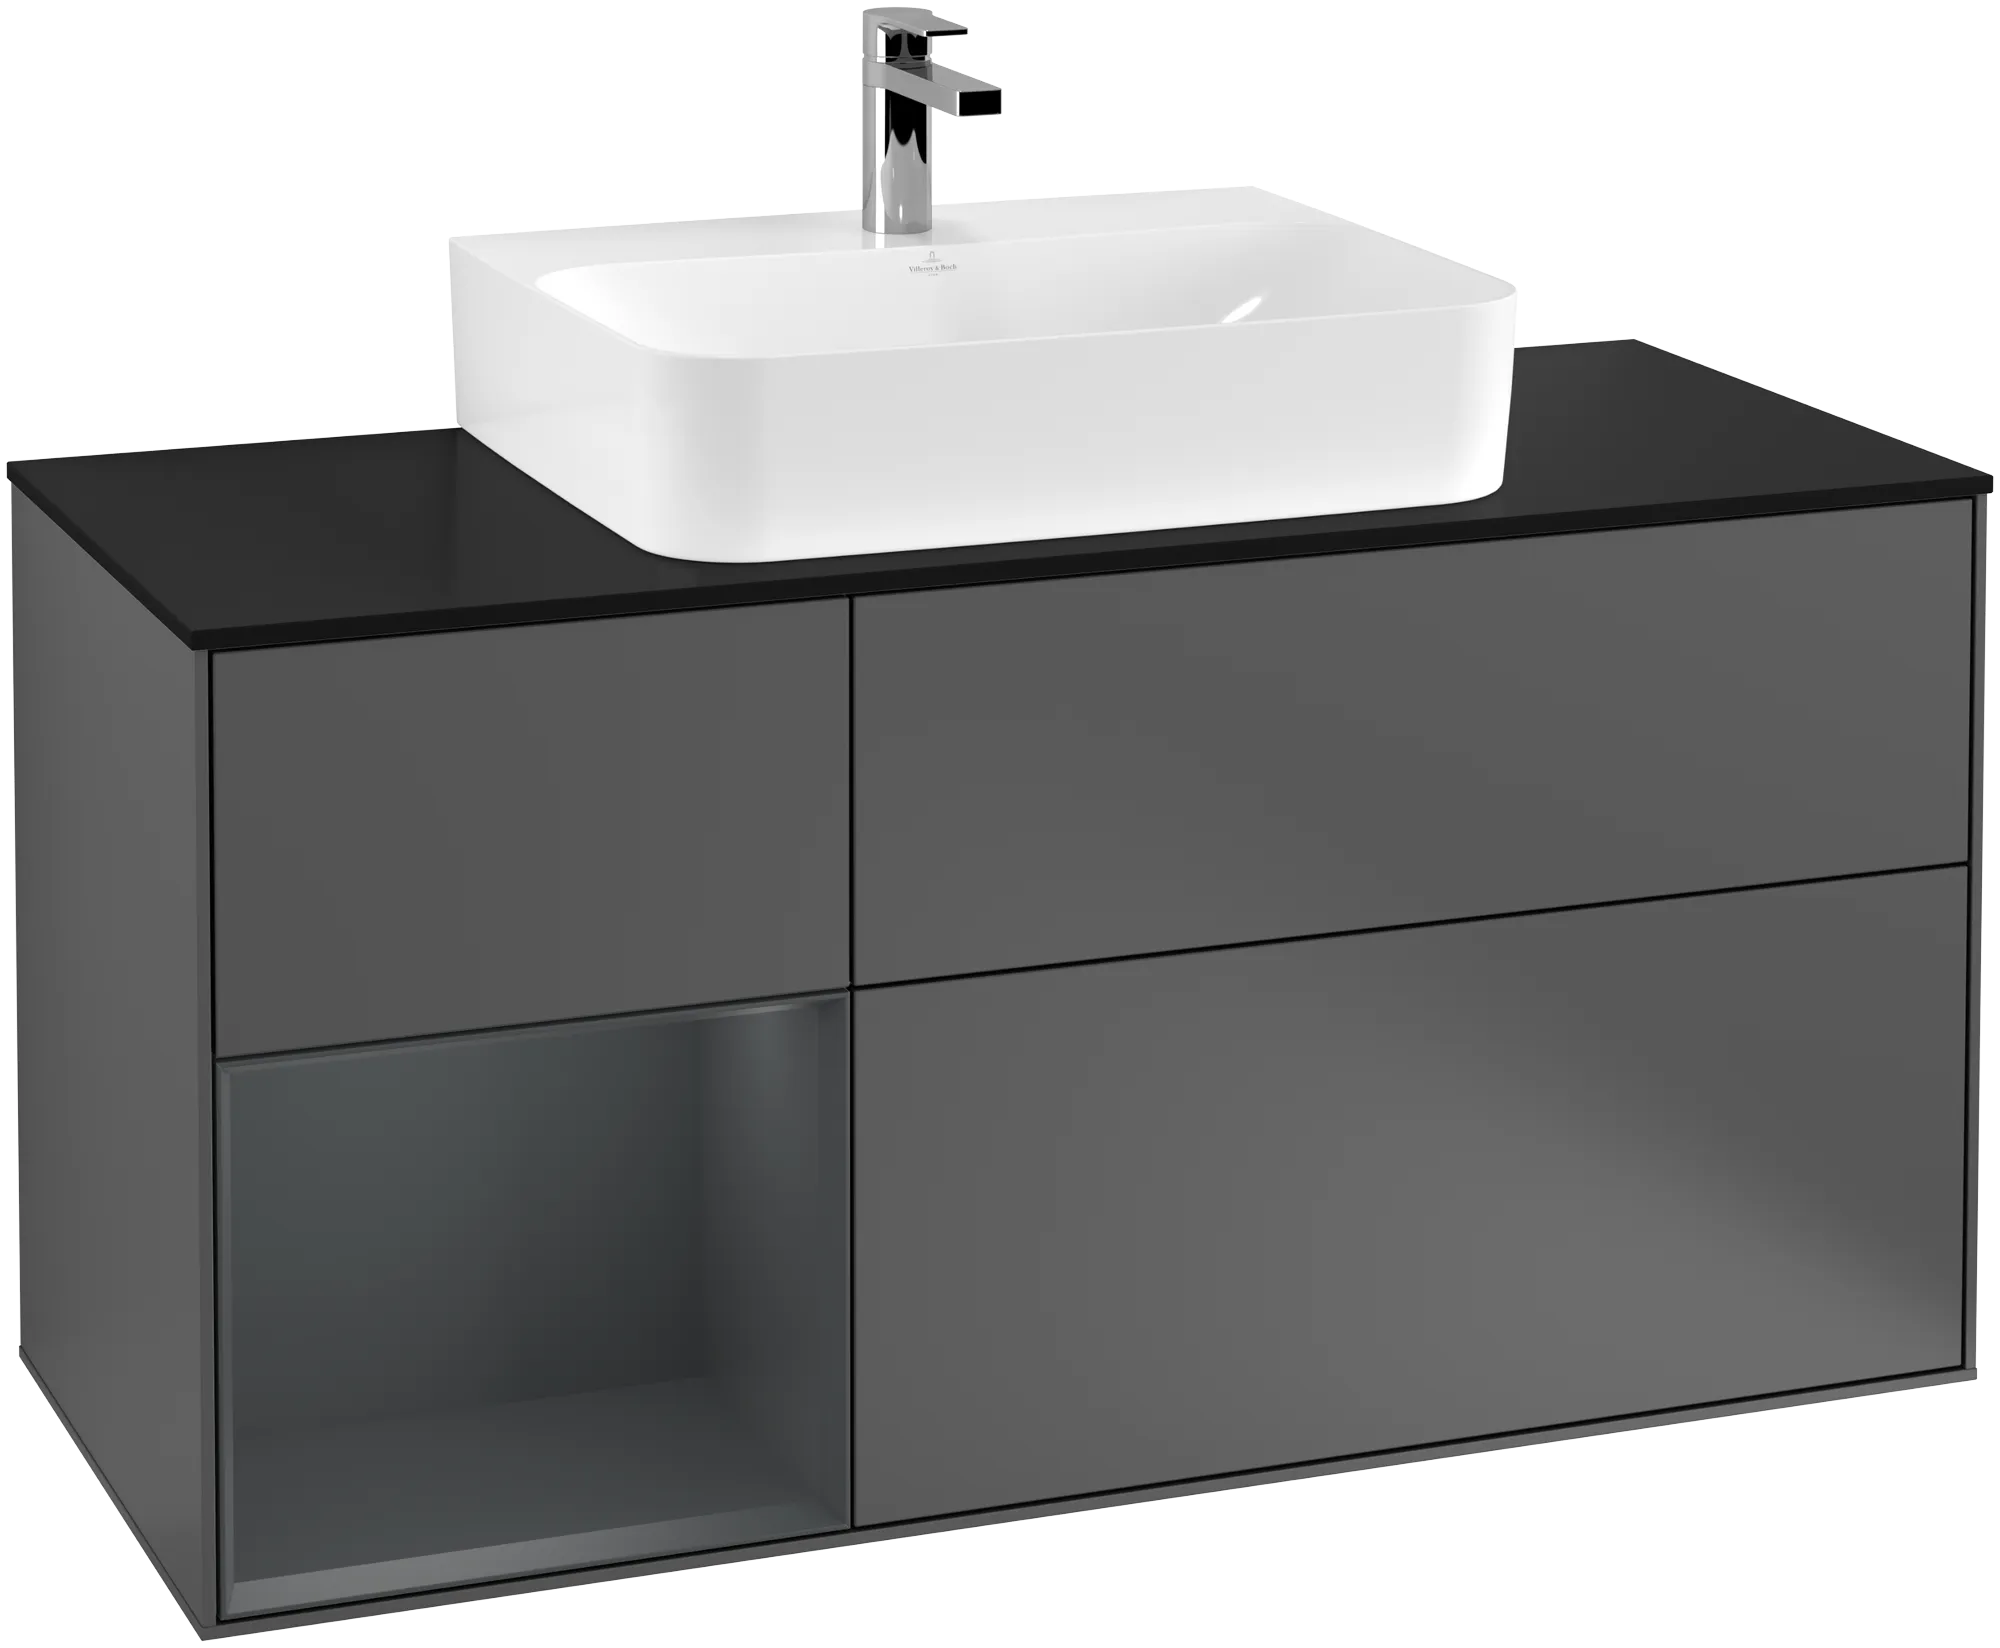 Picture of VILLEROY BOCH Finion Vanity unit, with lighting, 3 pull-out compartments, 1200 x 603 x 501 mm, Anthracite Matt Lacquer / Midnight Blue Matt Lacquer / Glass Black Matt #G162HGGK